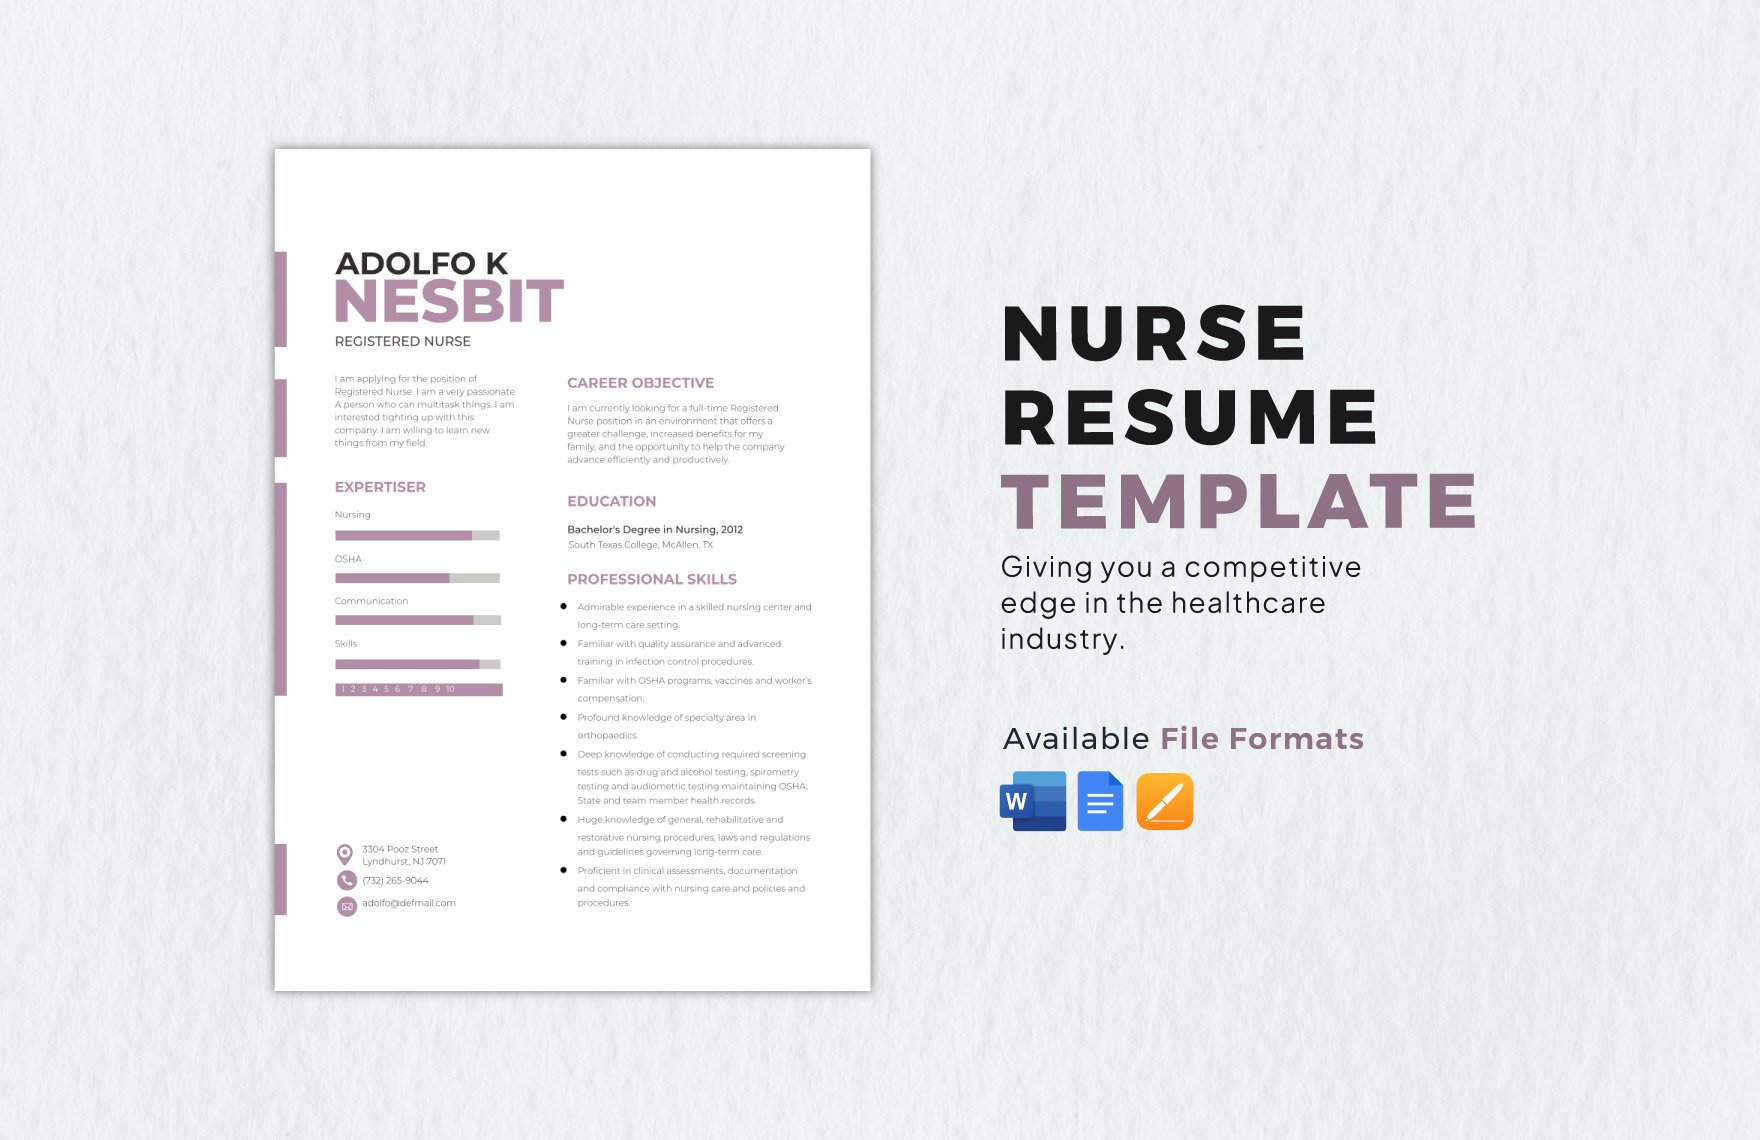 Nurse Resume Template in Word, Google Docs, PDF, Apple Pages